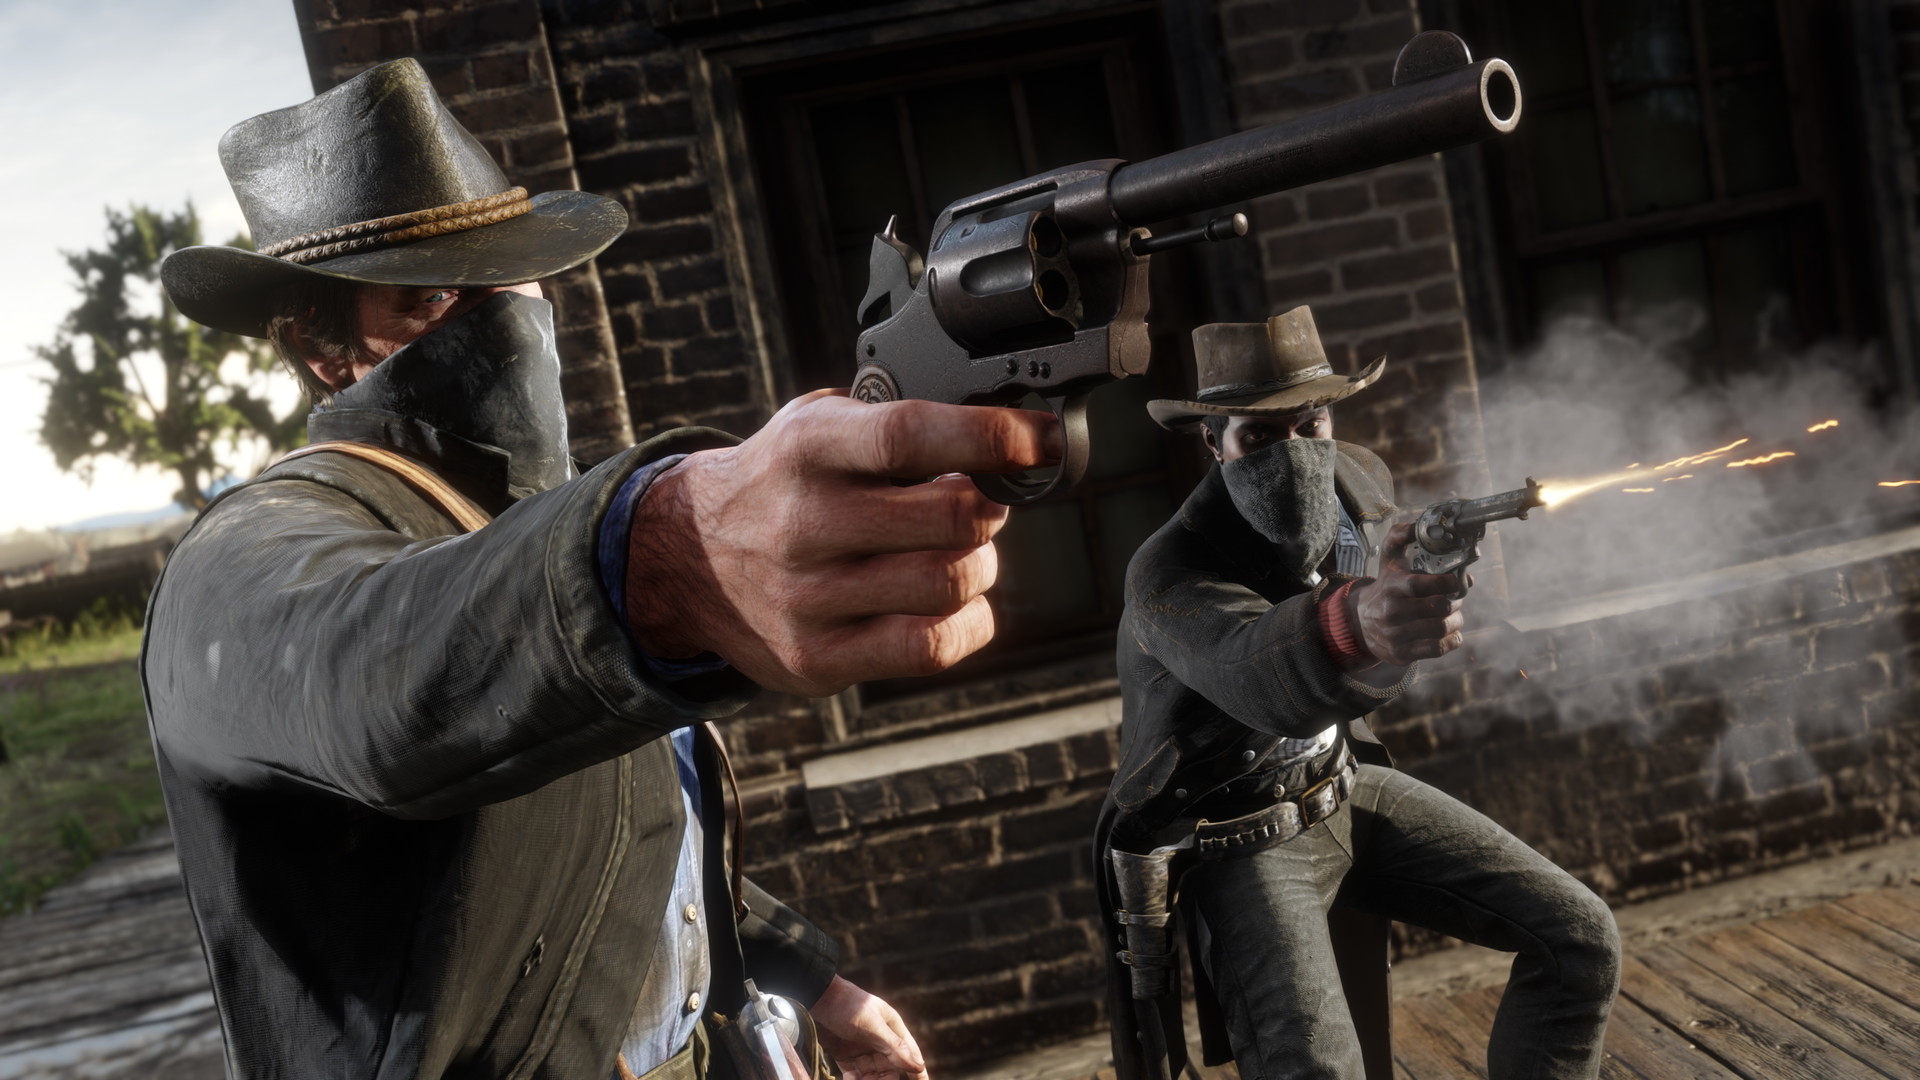 One of the best Rockstar games Red Dead Redemption 2 costs $20 on Steam until 29 July